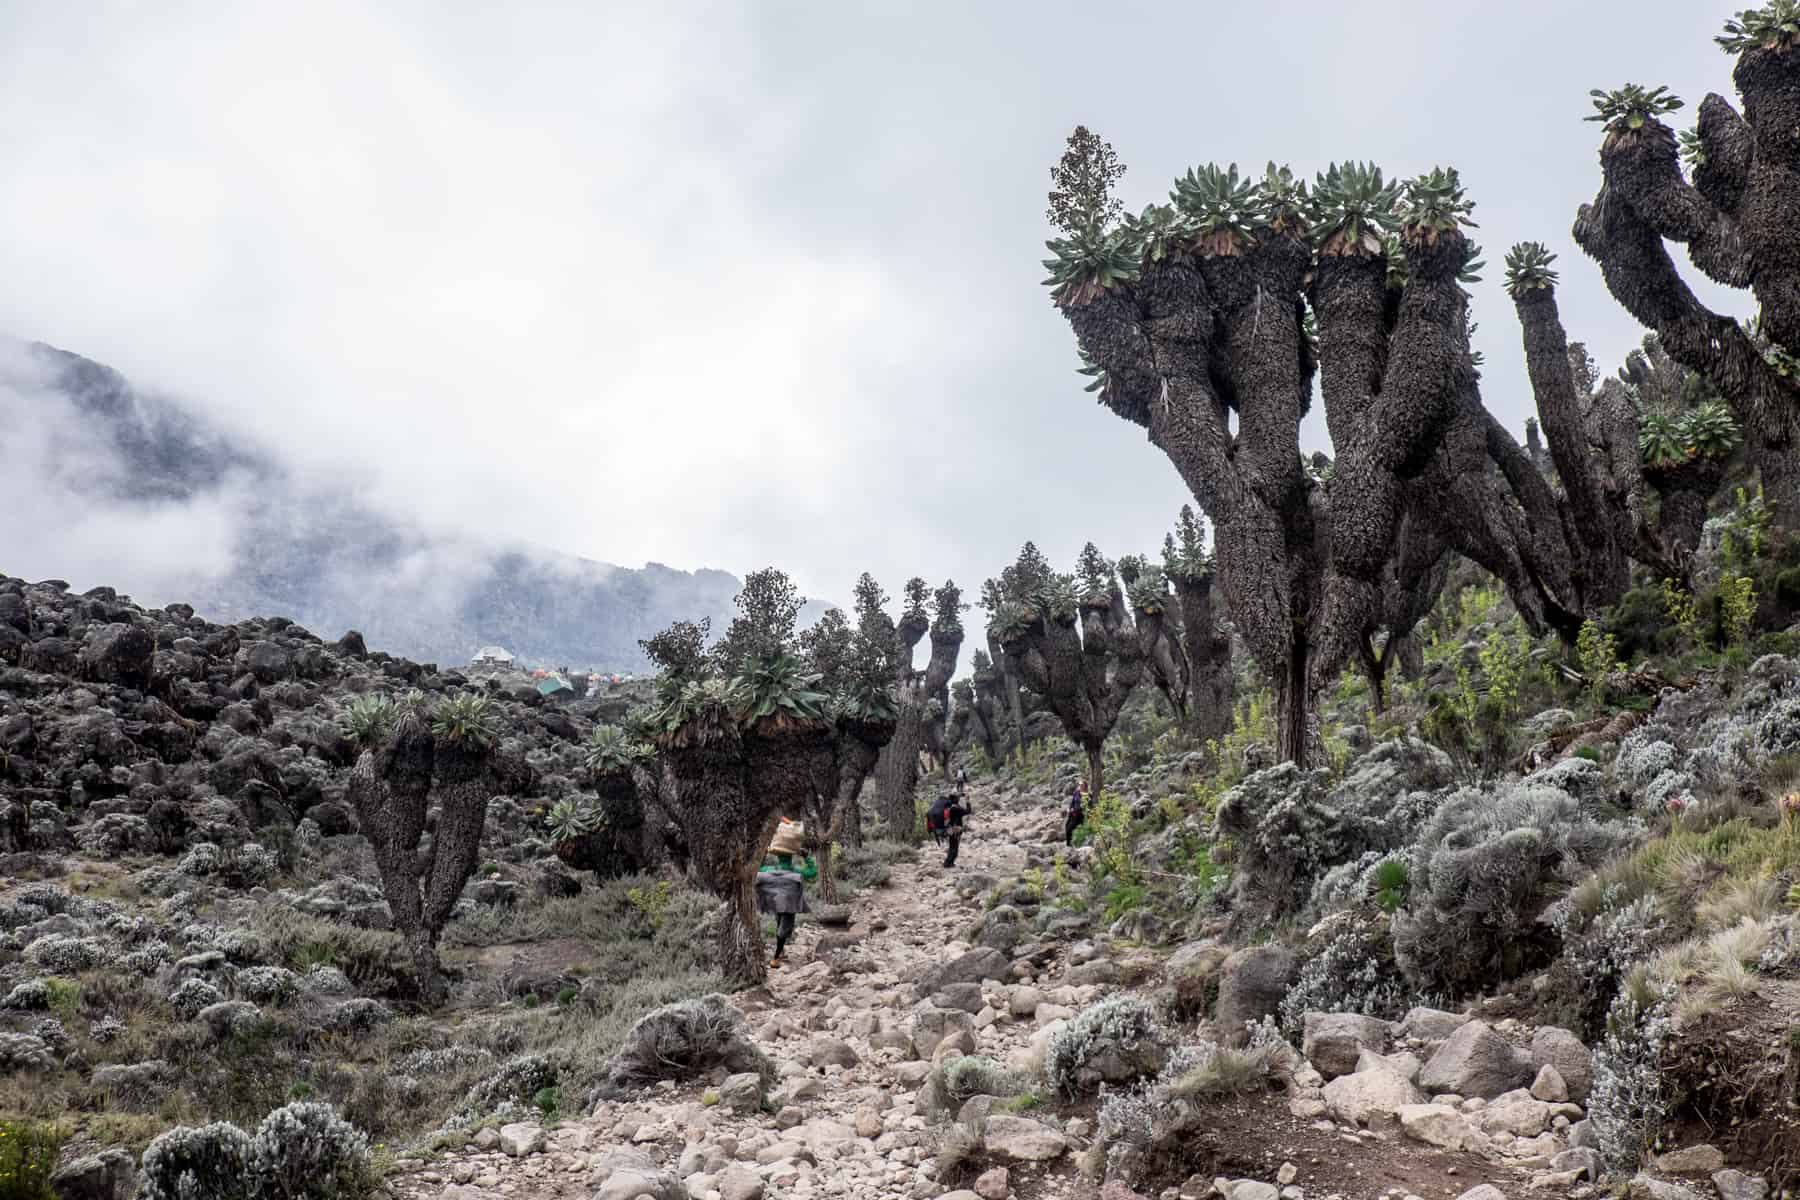 Three people walk on a light rocky pathway that cuts through a boulder-filled valley of Kilimanjaro lined with quirky, thick-trunked trees with foliage nests.